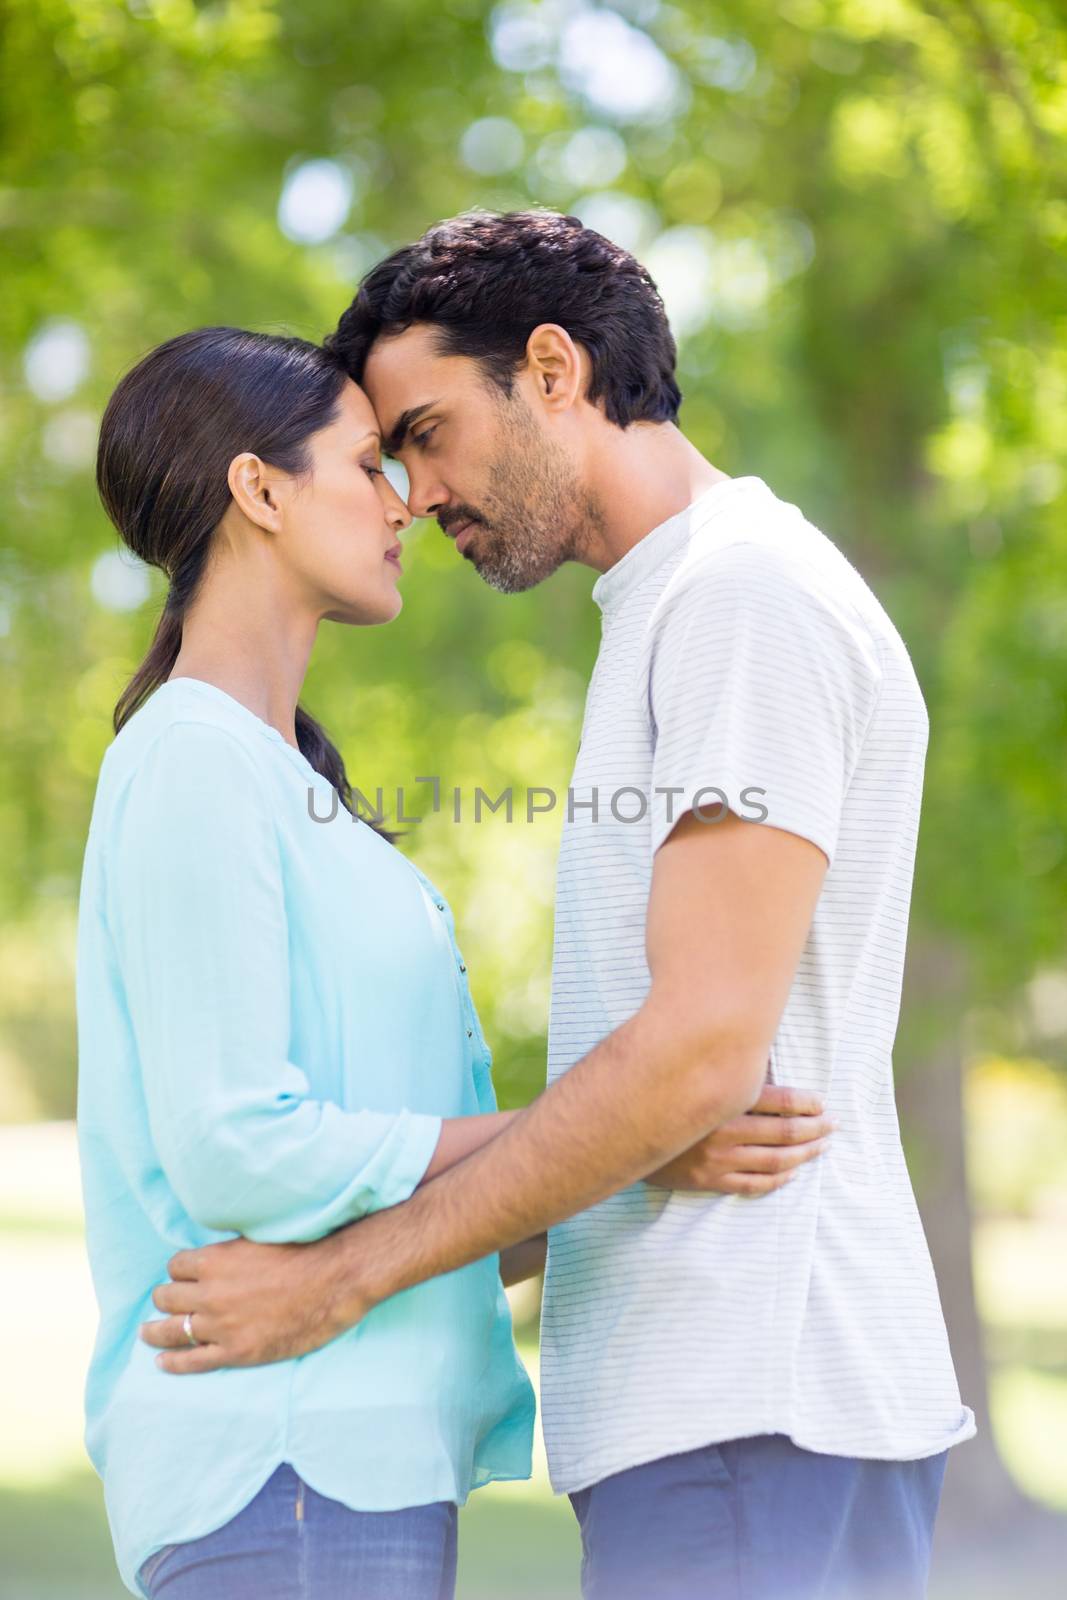 Romantic couple embracing each other in park